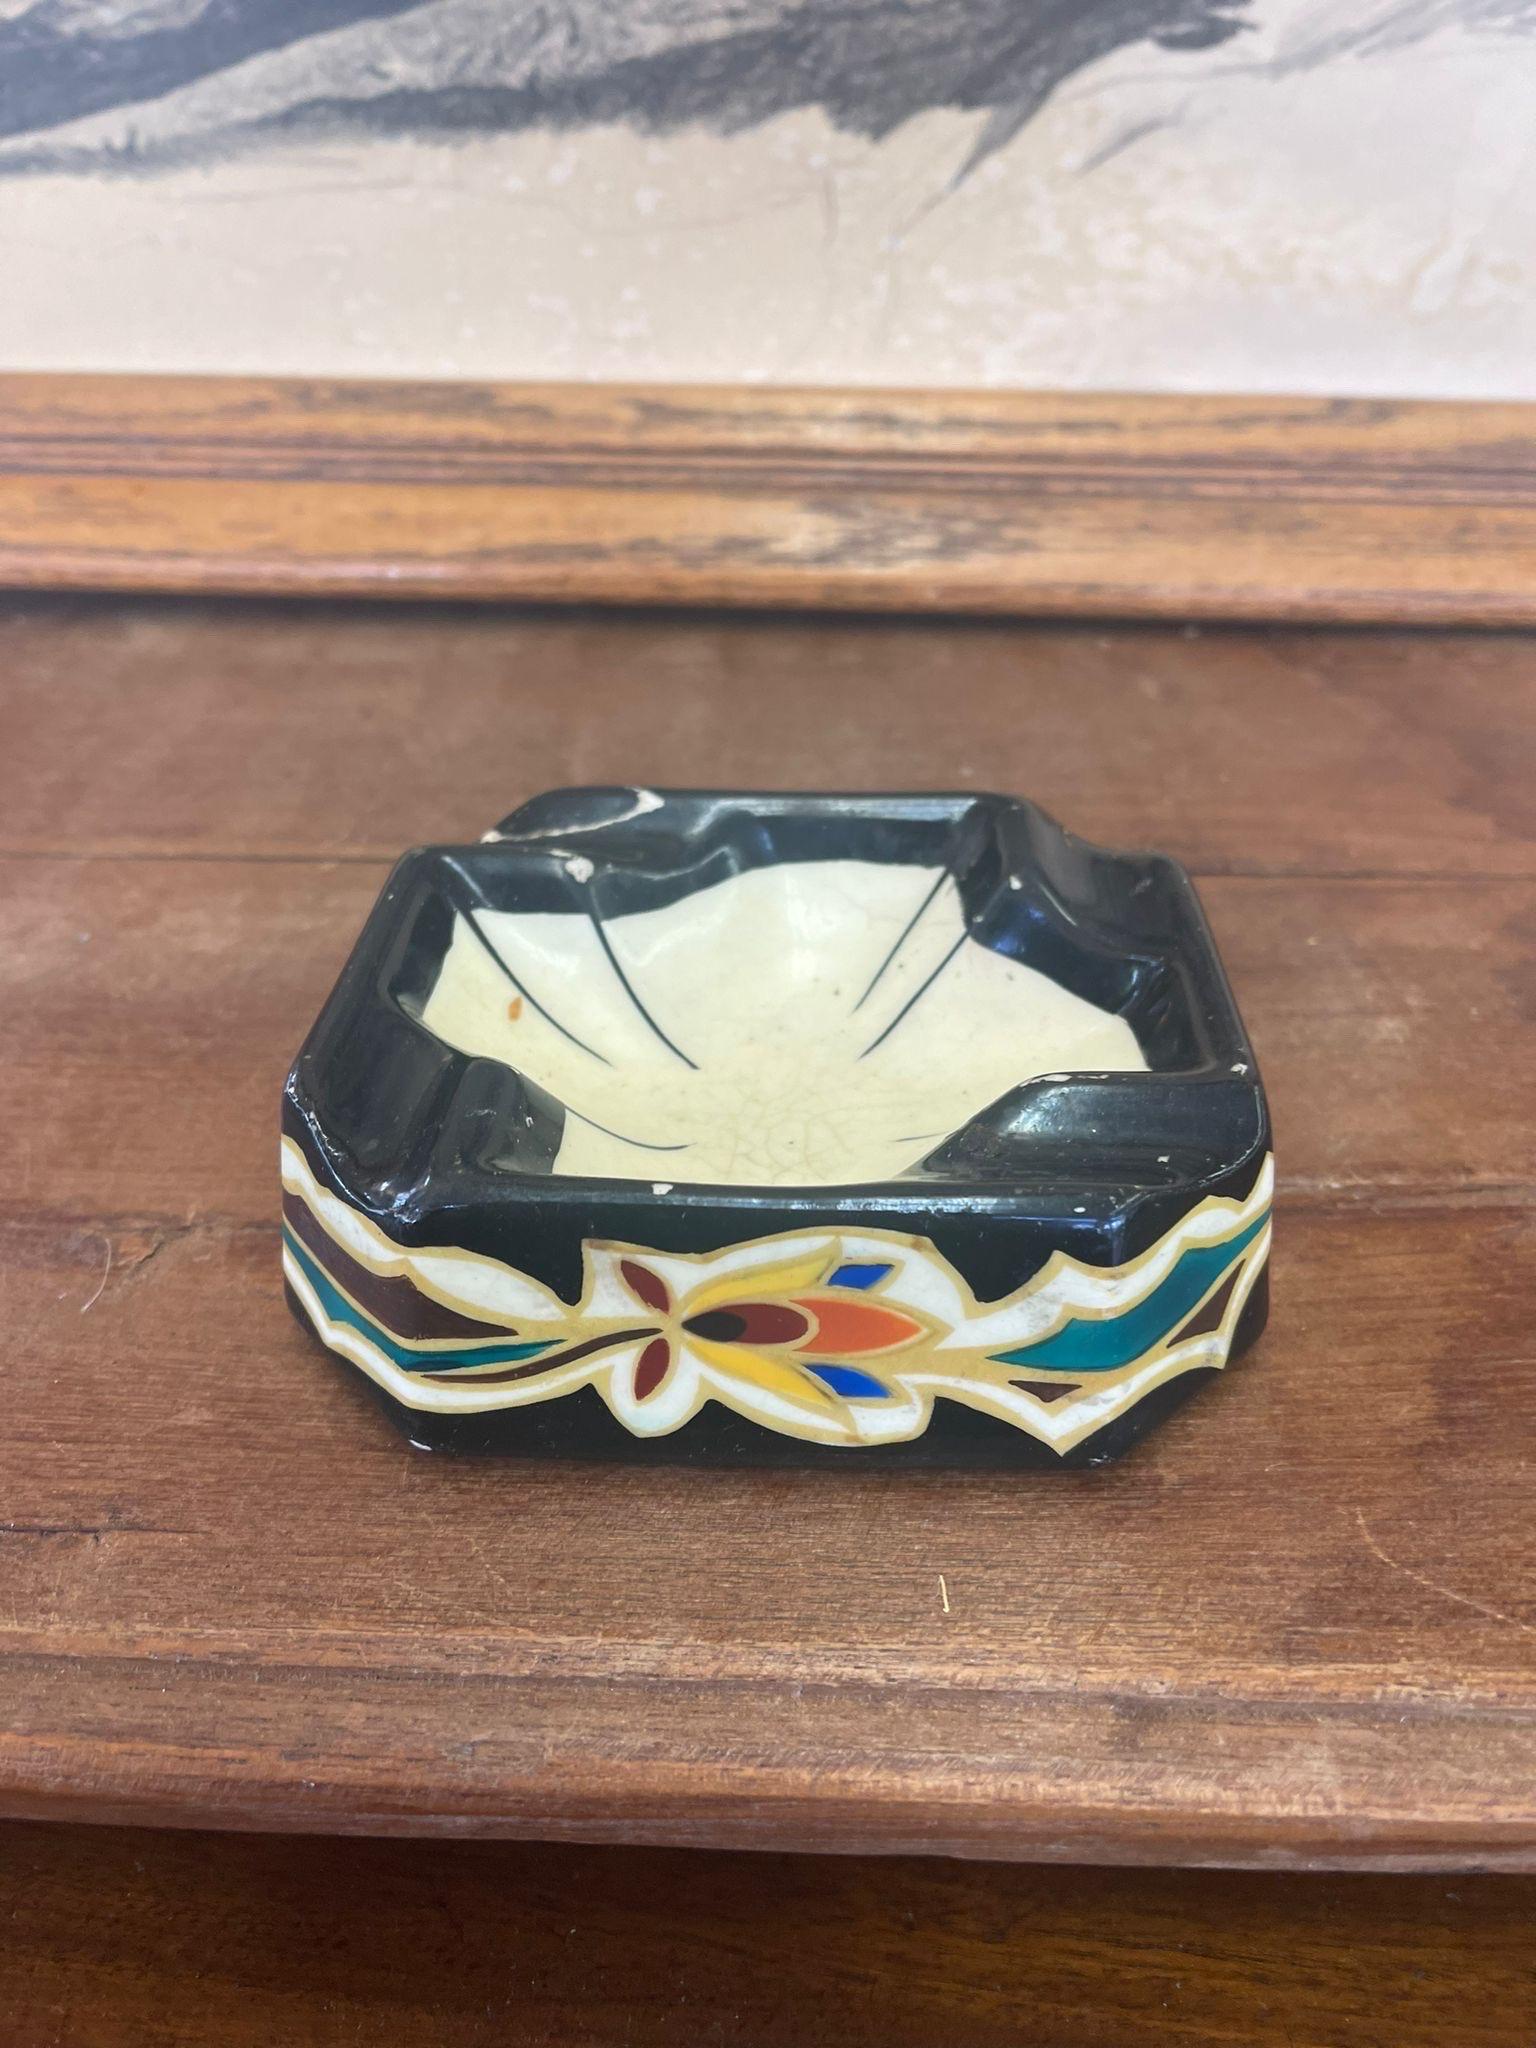 Traditional design atop this unique Ashtray. Maker mark on the bottom, stating that was made in Holland. Vintage Condition Consistent with Age as Pictured.

Dimensions. 5 W ; 4 1/2 D ; 2 H